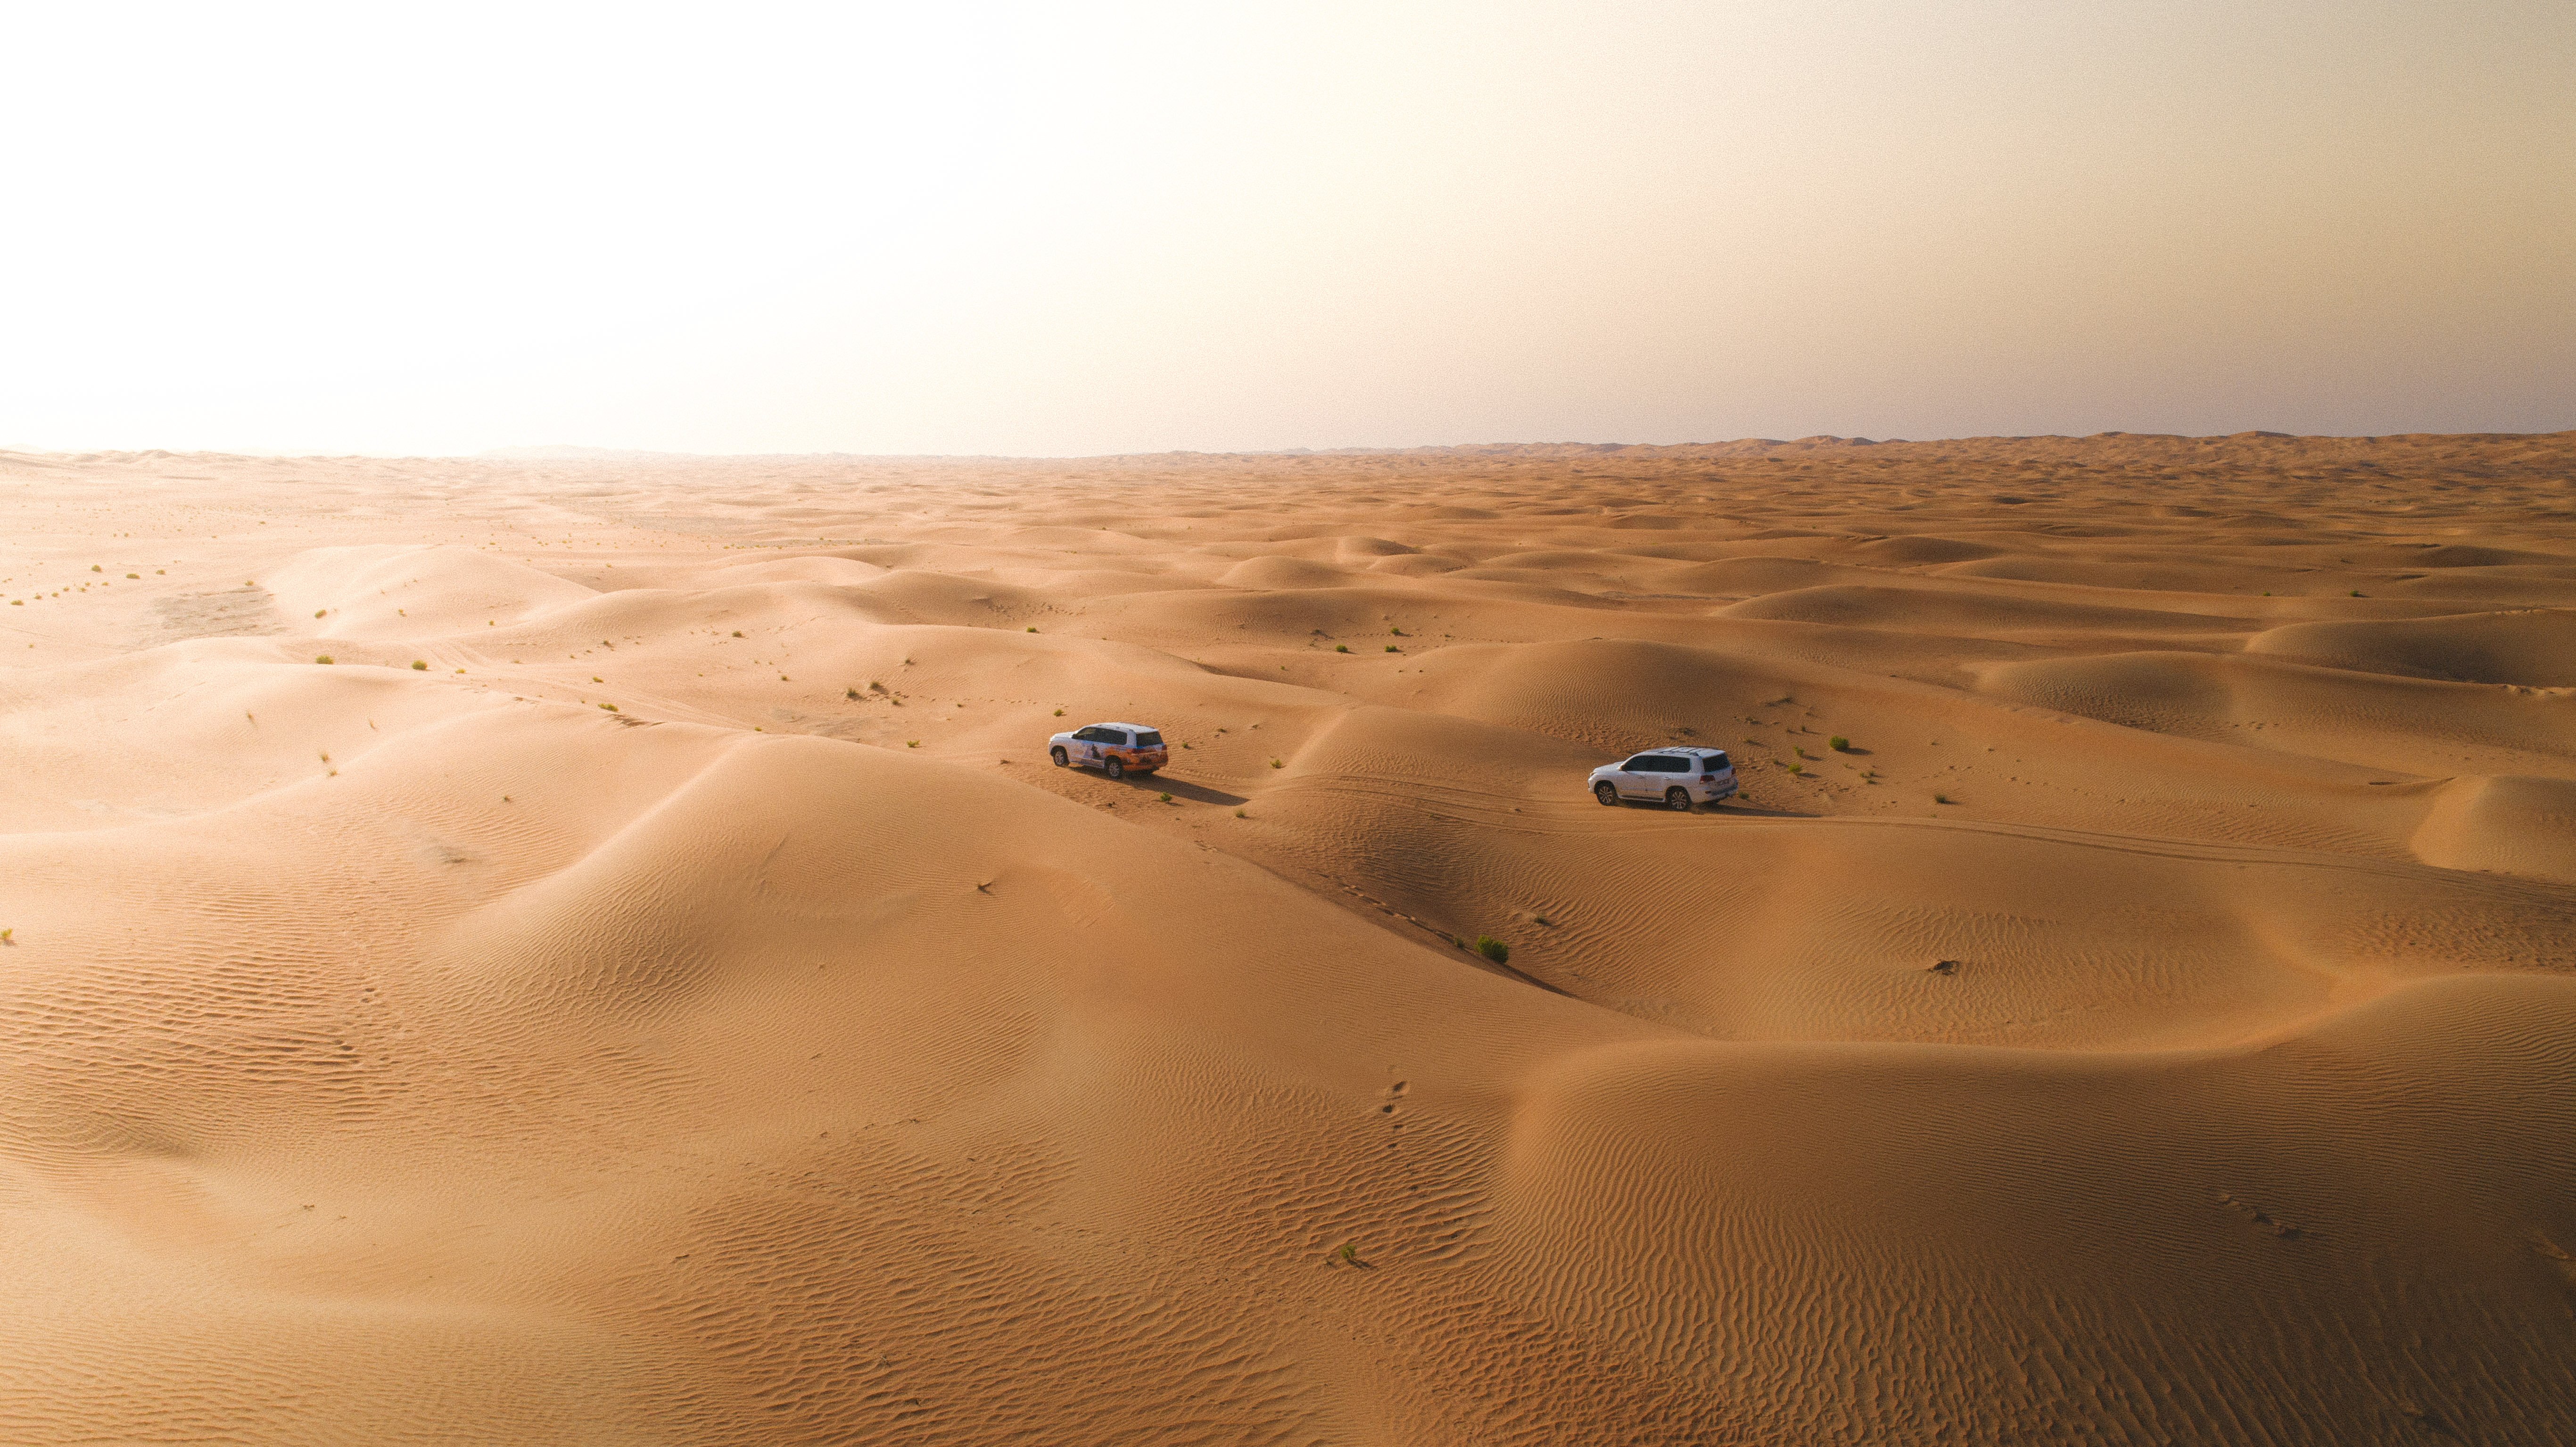 The Empty Quarter is full of memorable experiences